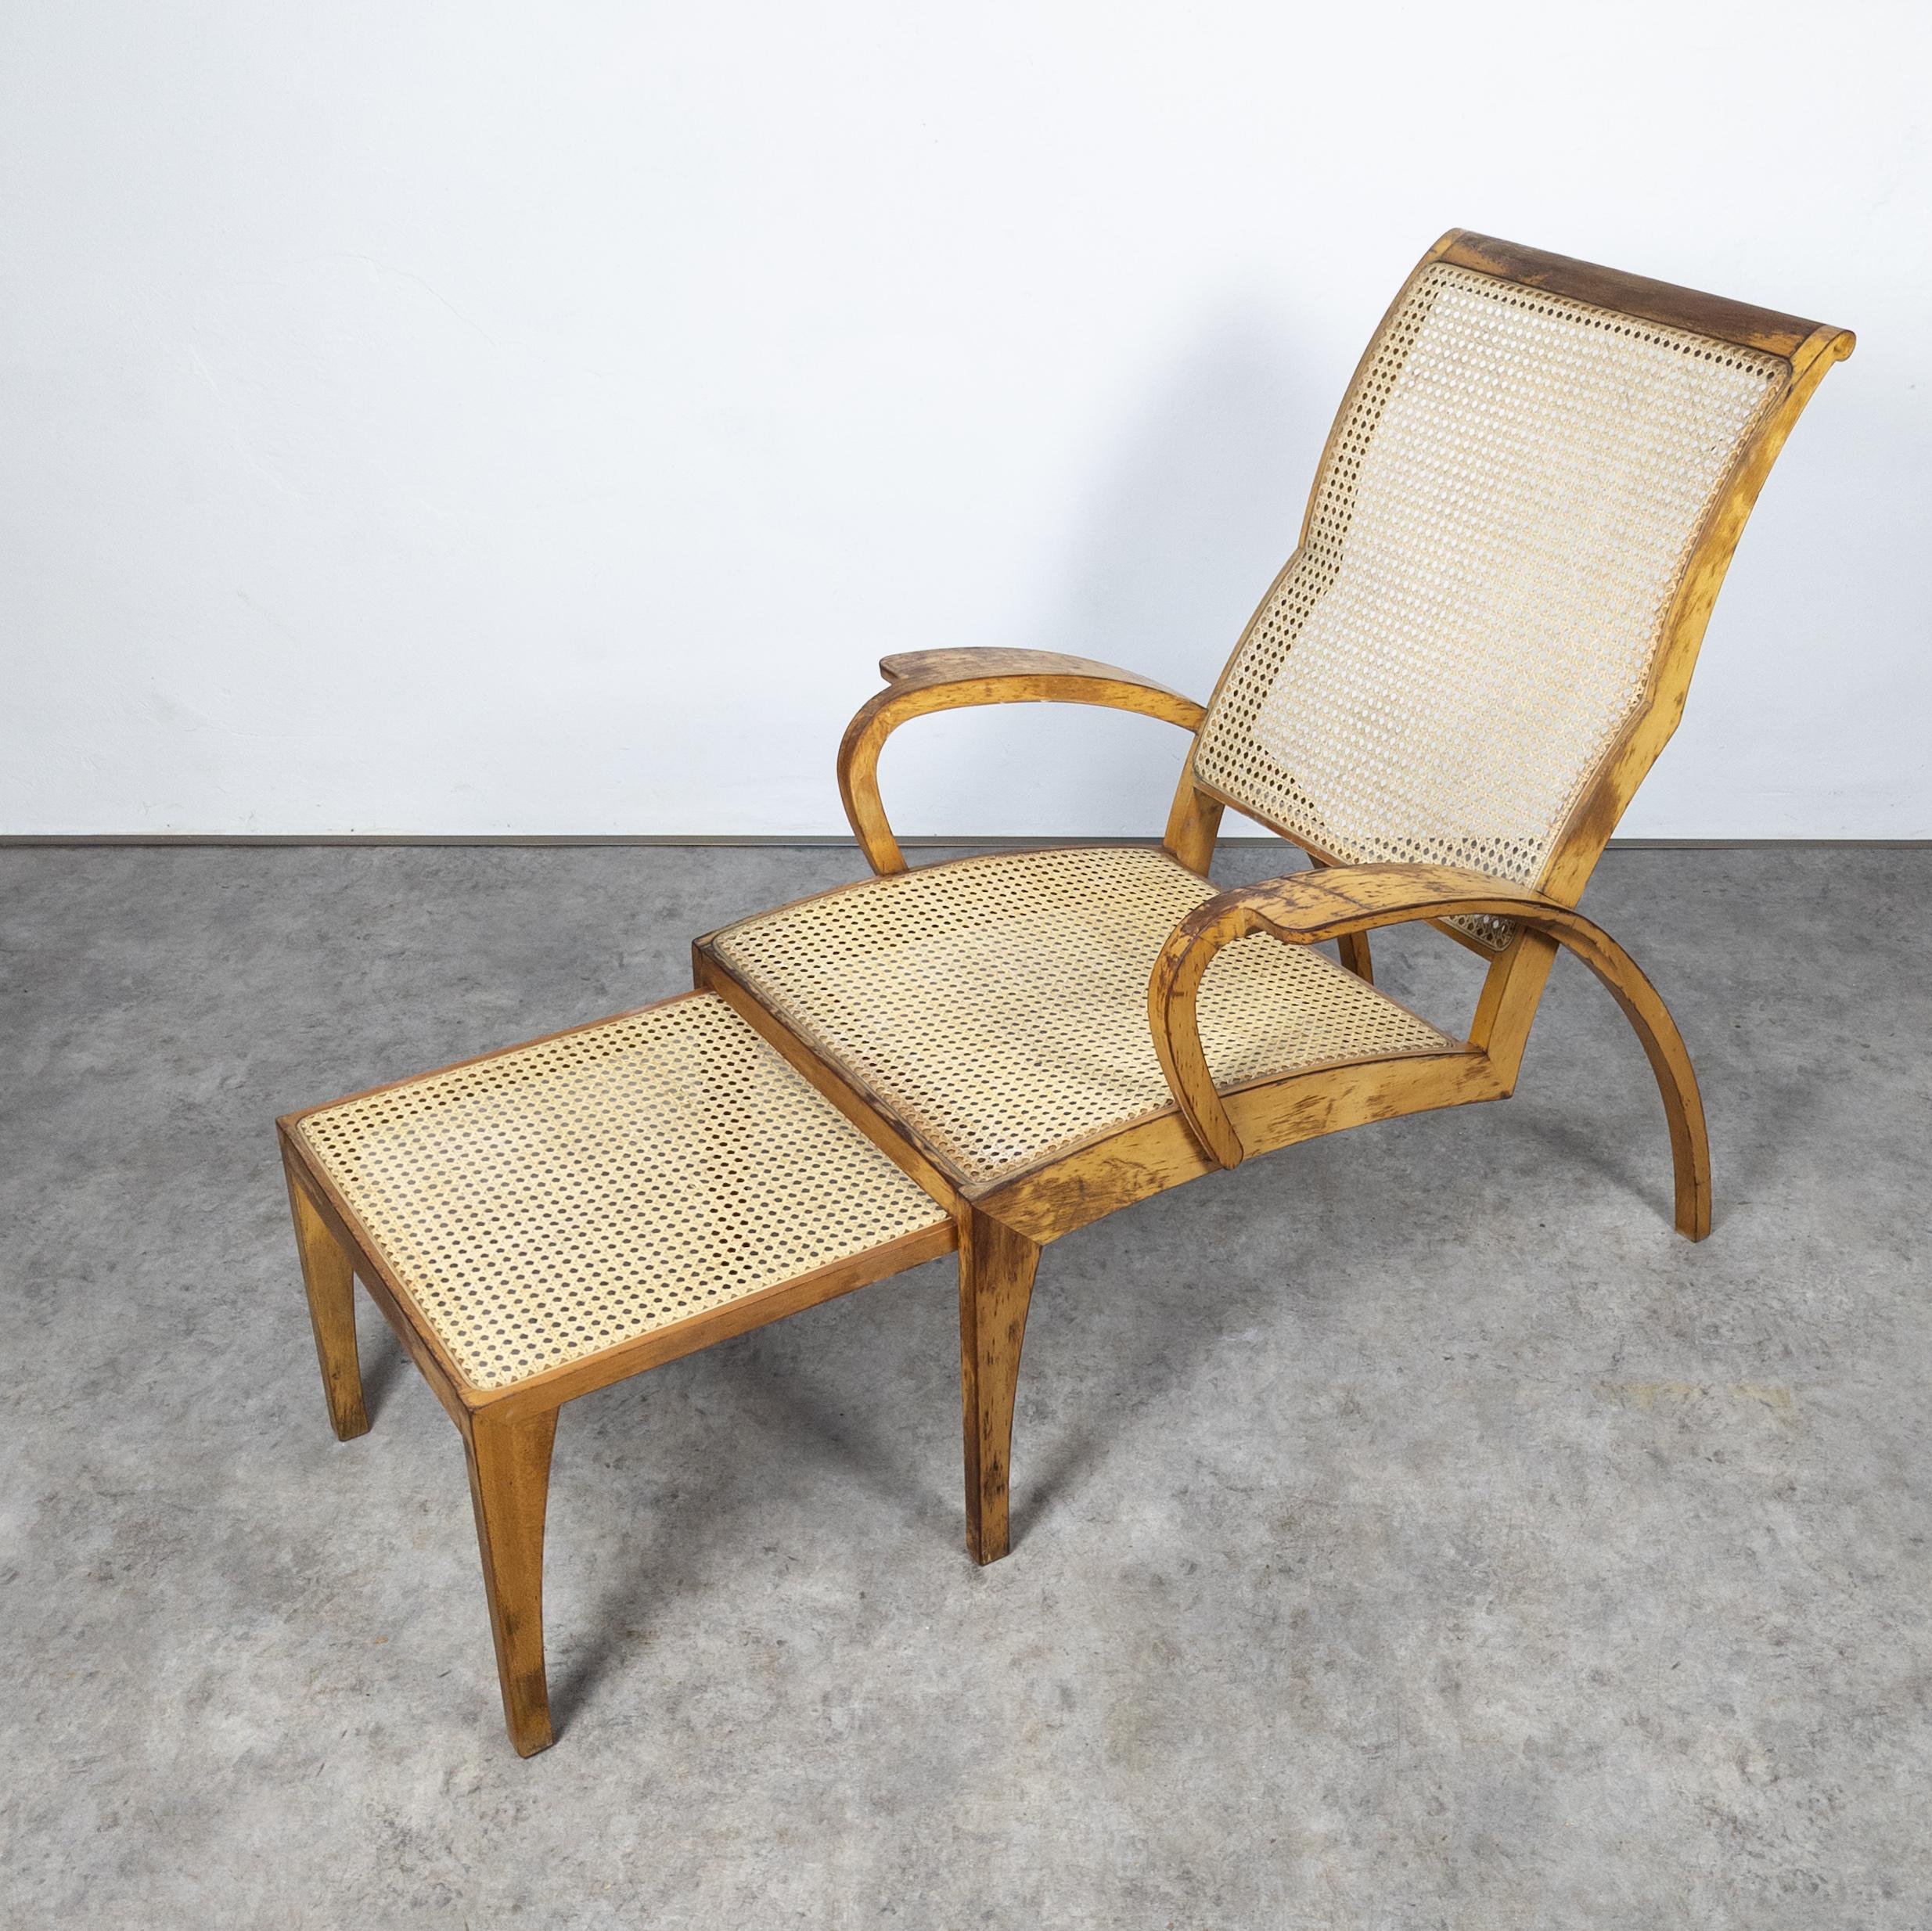 Czech Vintage wood and rattan patio chaise lounge from Krasna Jizba 1930s For Sale